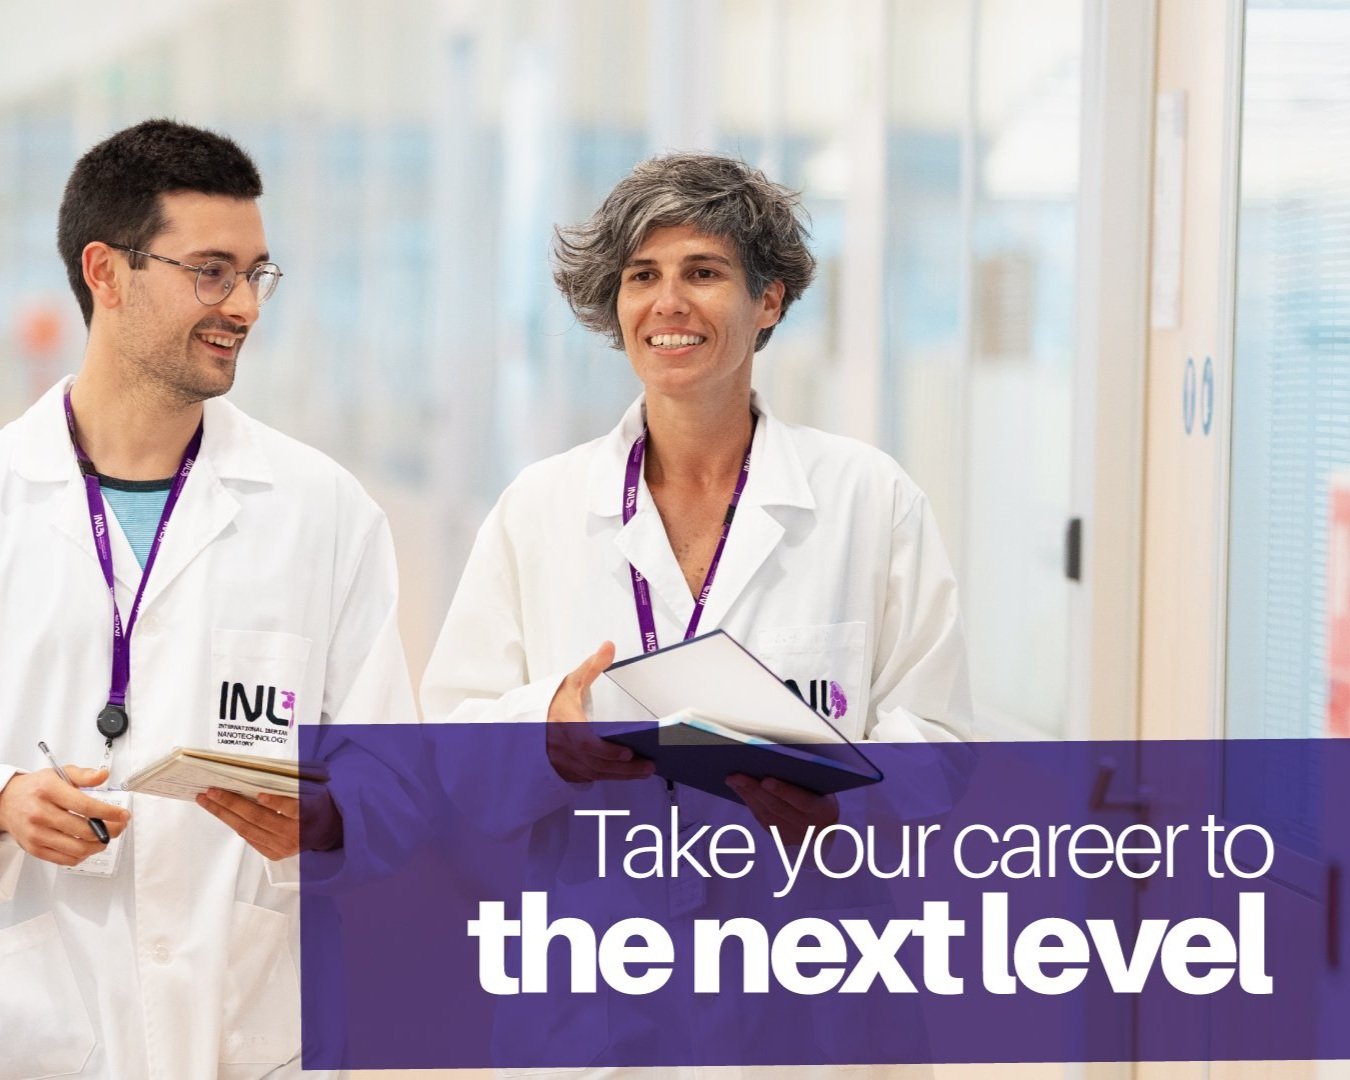 INL is hiring over 100 positions in different fields of Science and Engineering